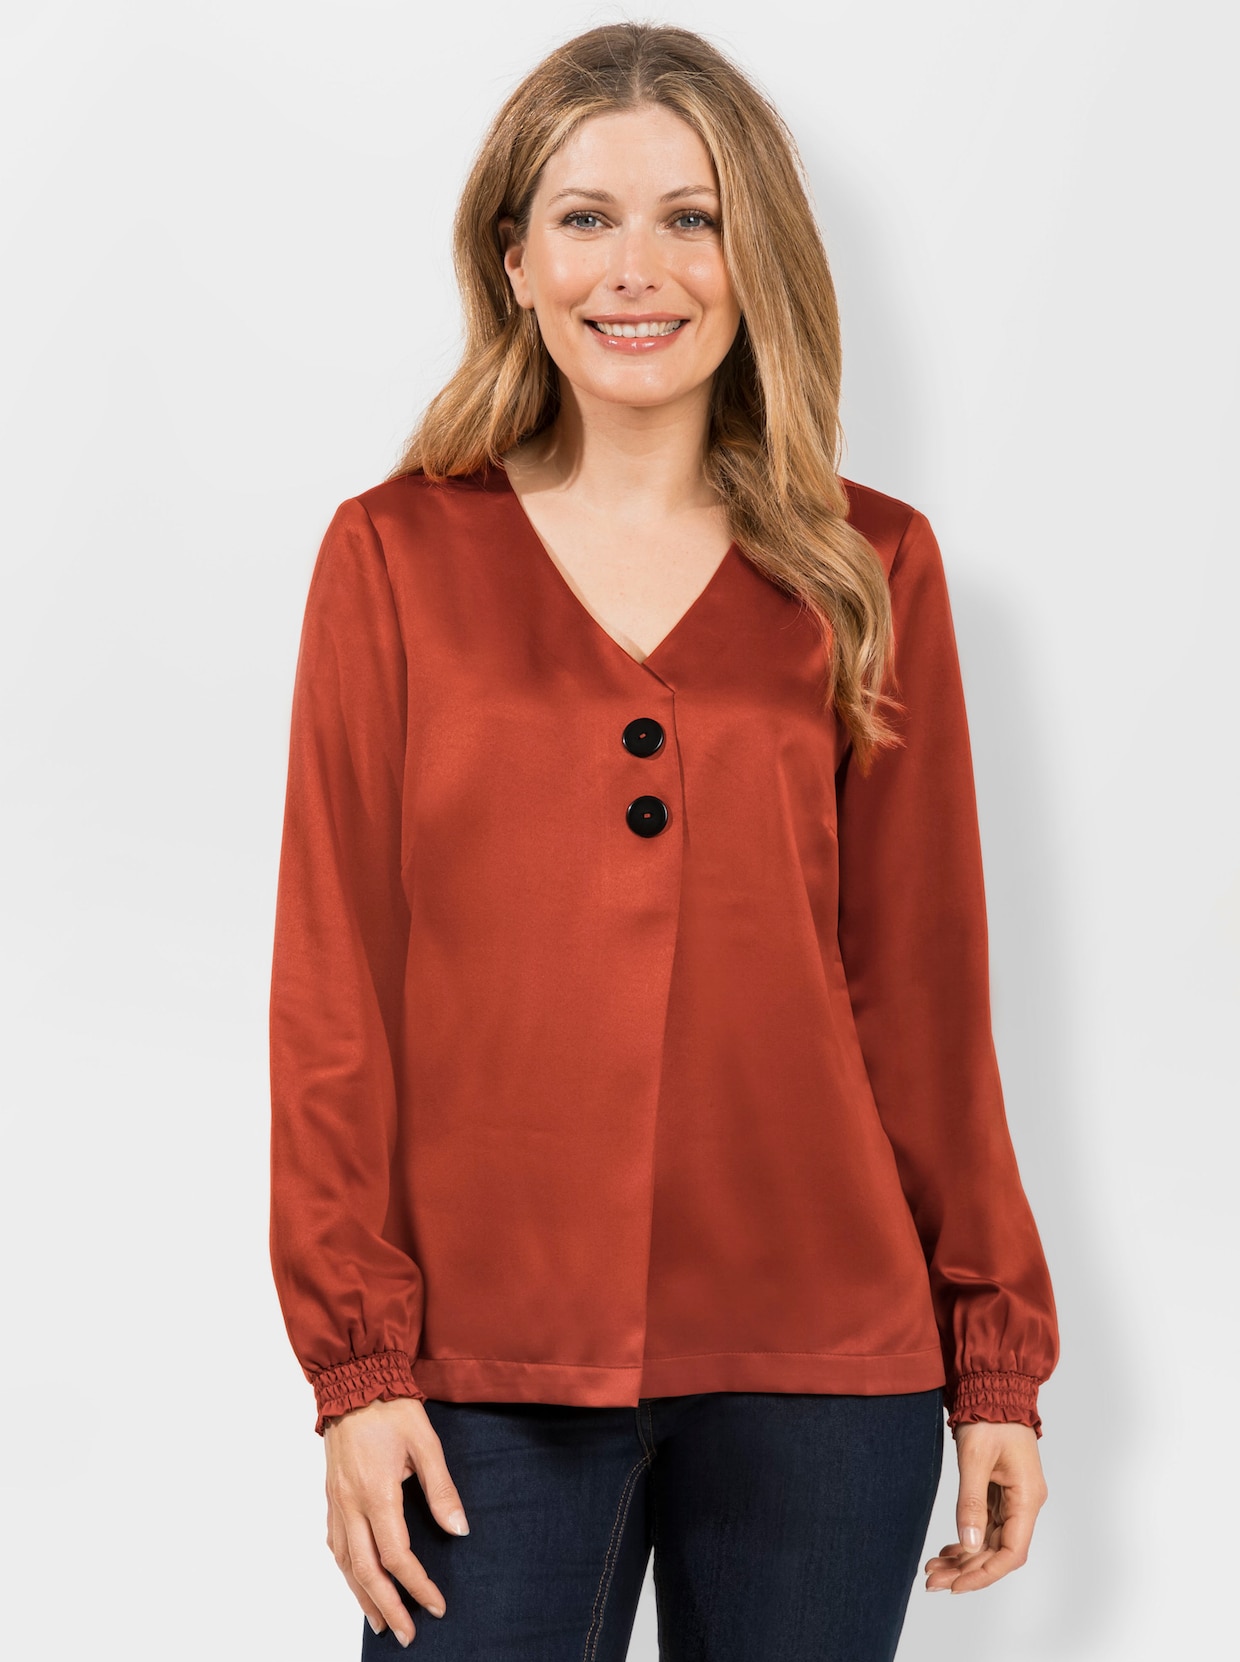 Comfortabele blouse - roestrood